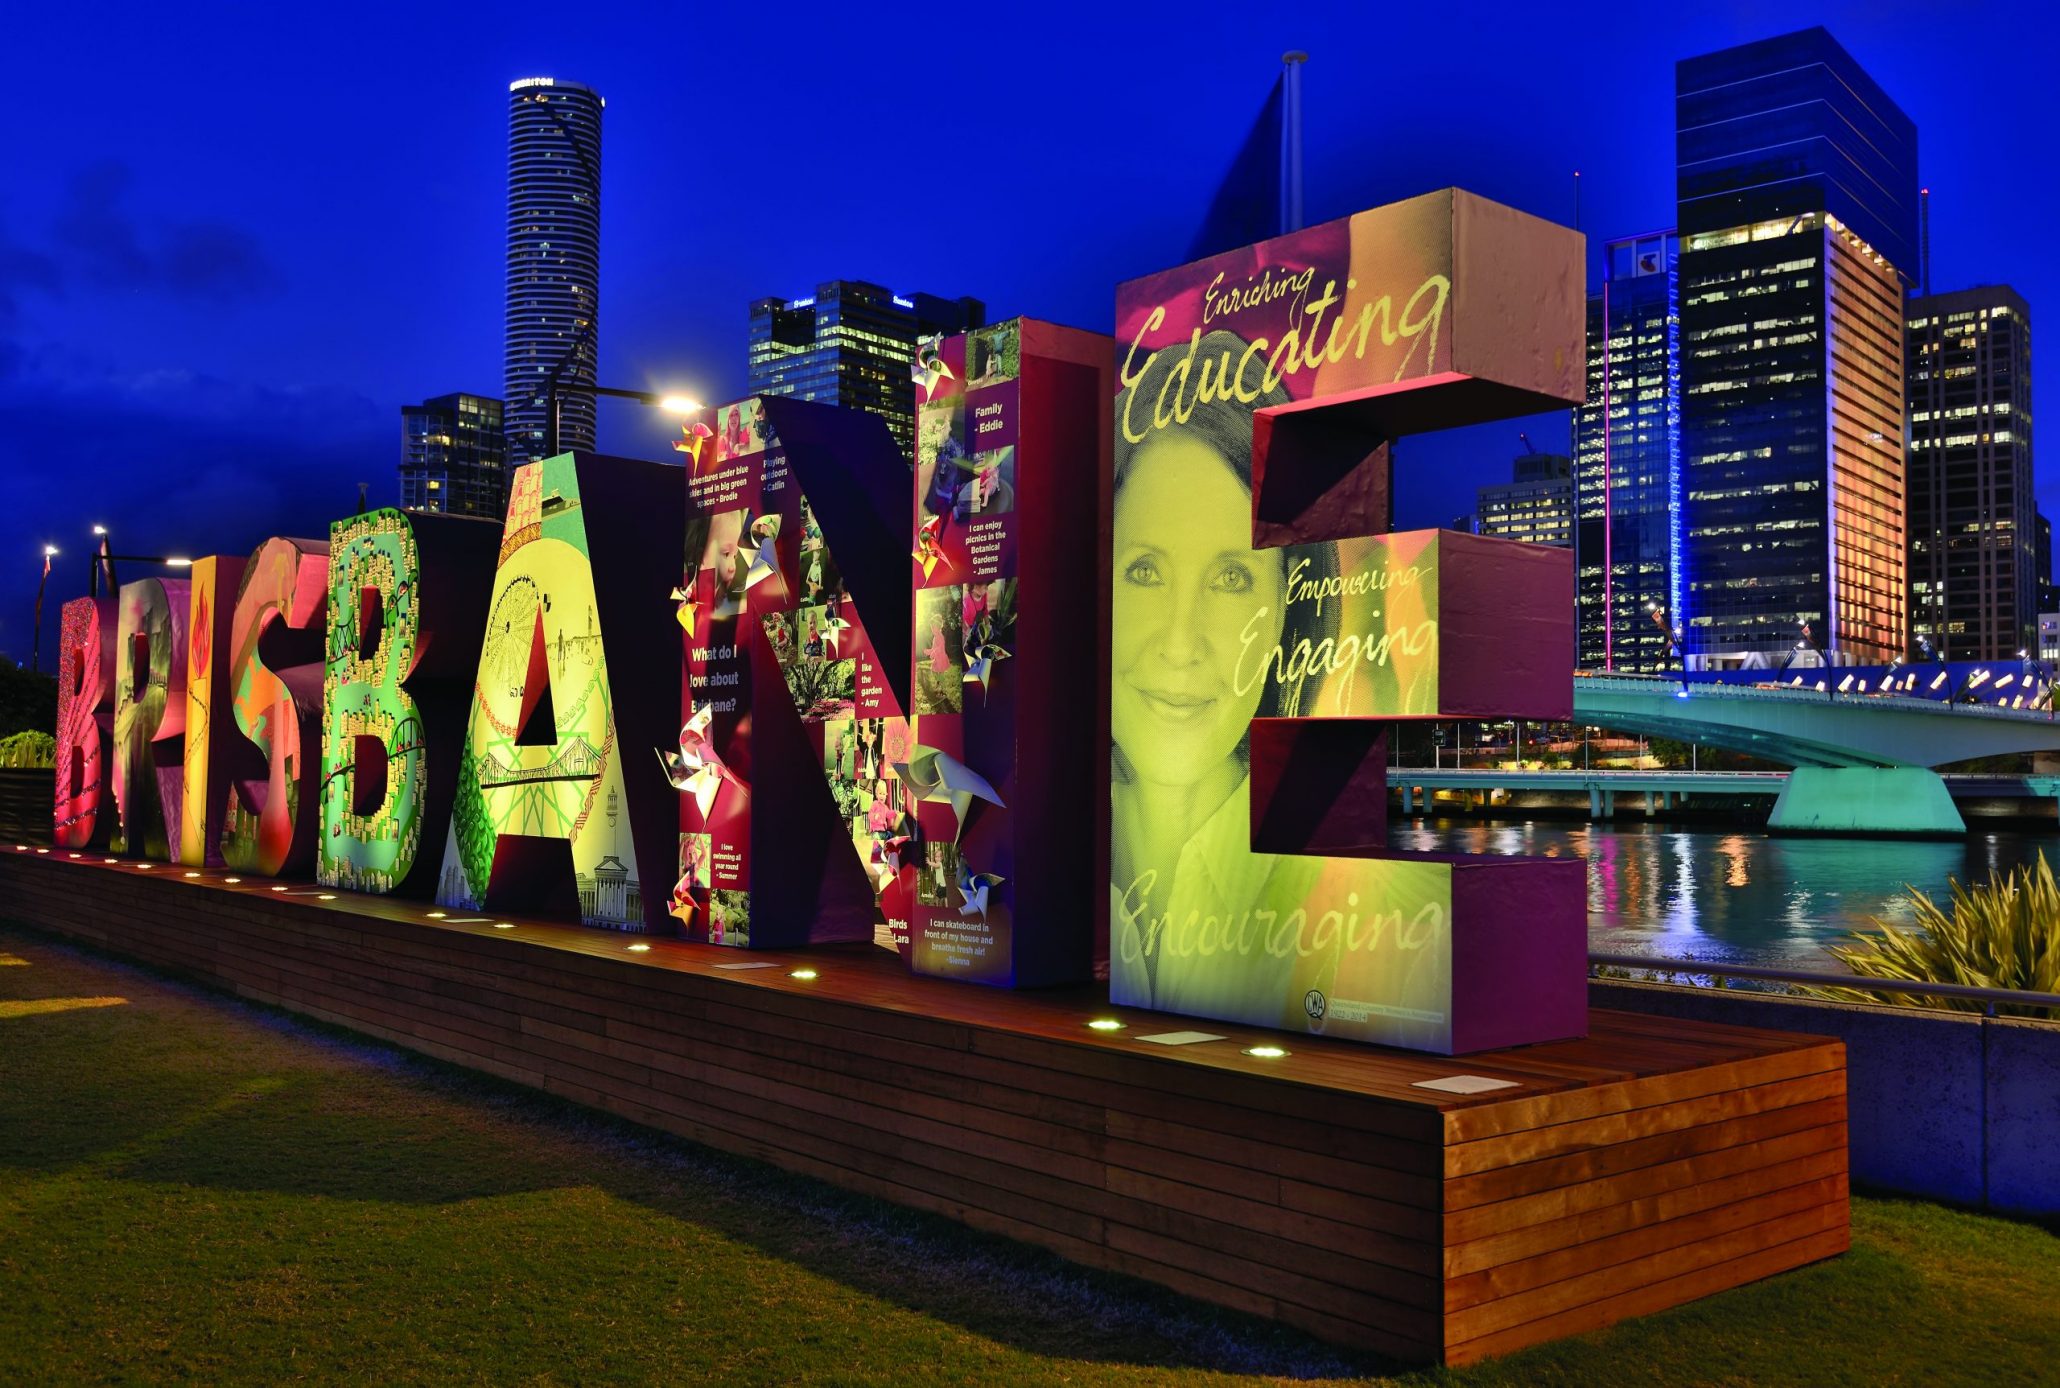 BRISBANE,QLD/AUSTRALIA - NOVEMBER 13, 2014: View on freshly installed Brisbane sign and buildings of the city illuminated for G20 summit.